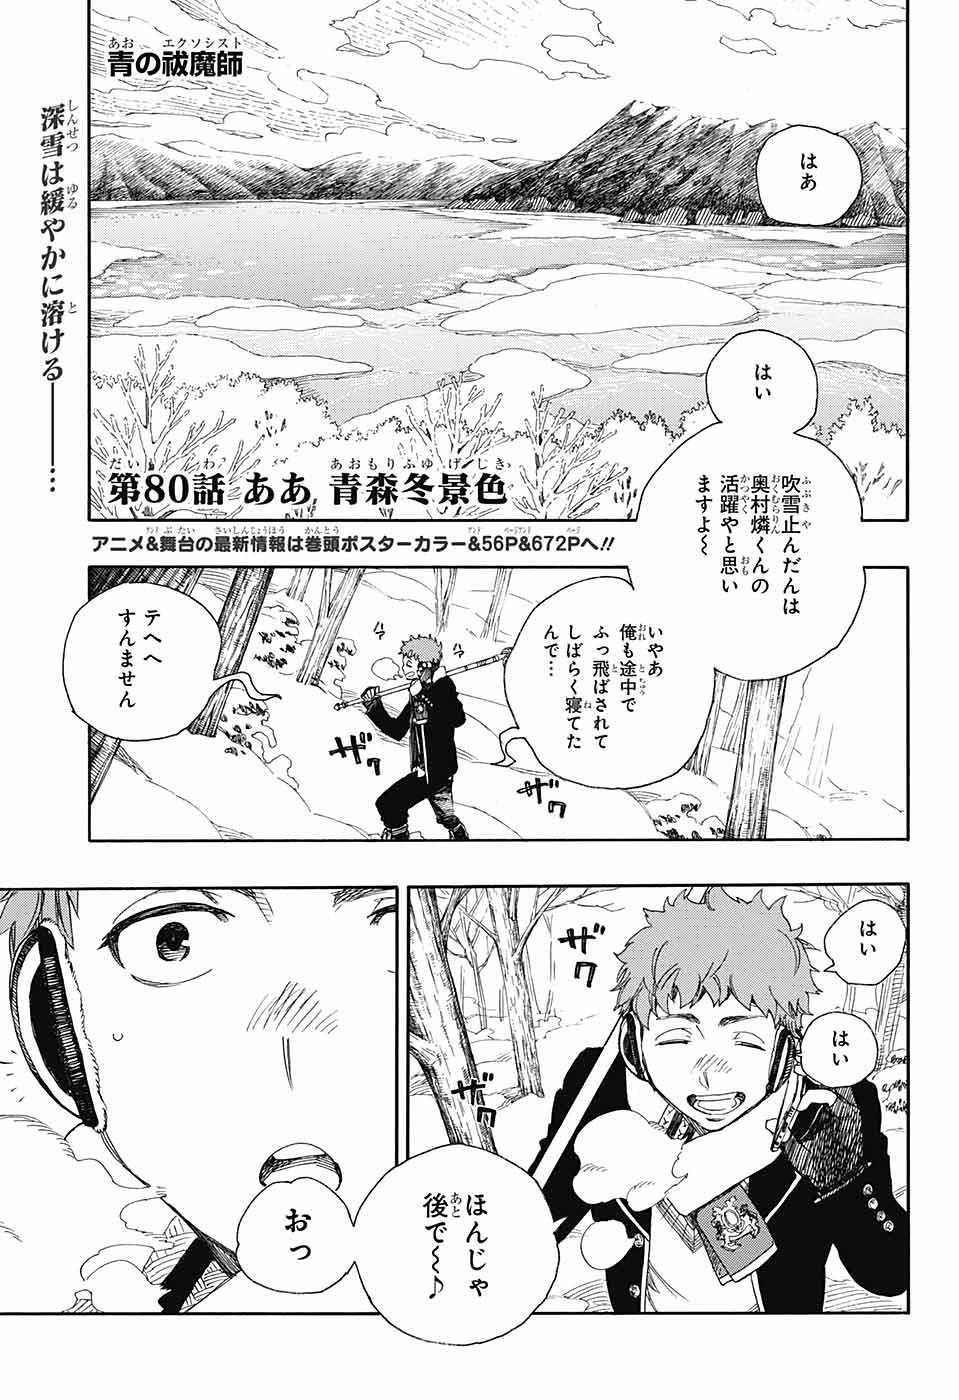 Ao no Exorcist - Chapter 80 - Page 5